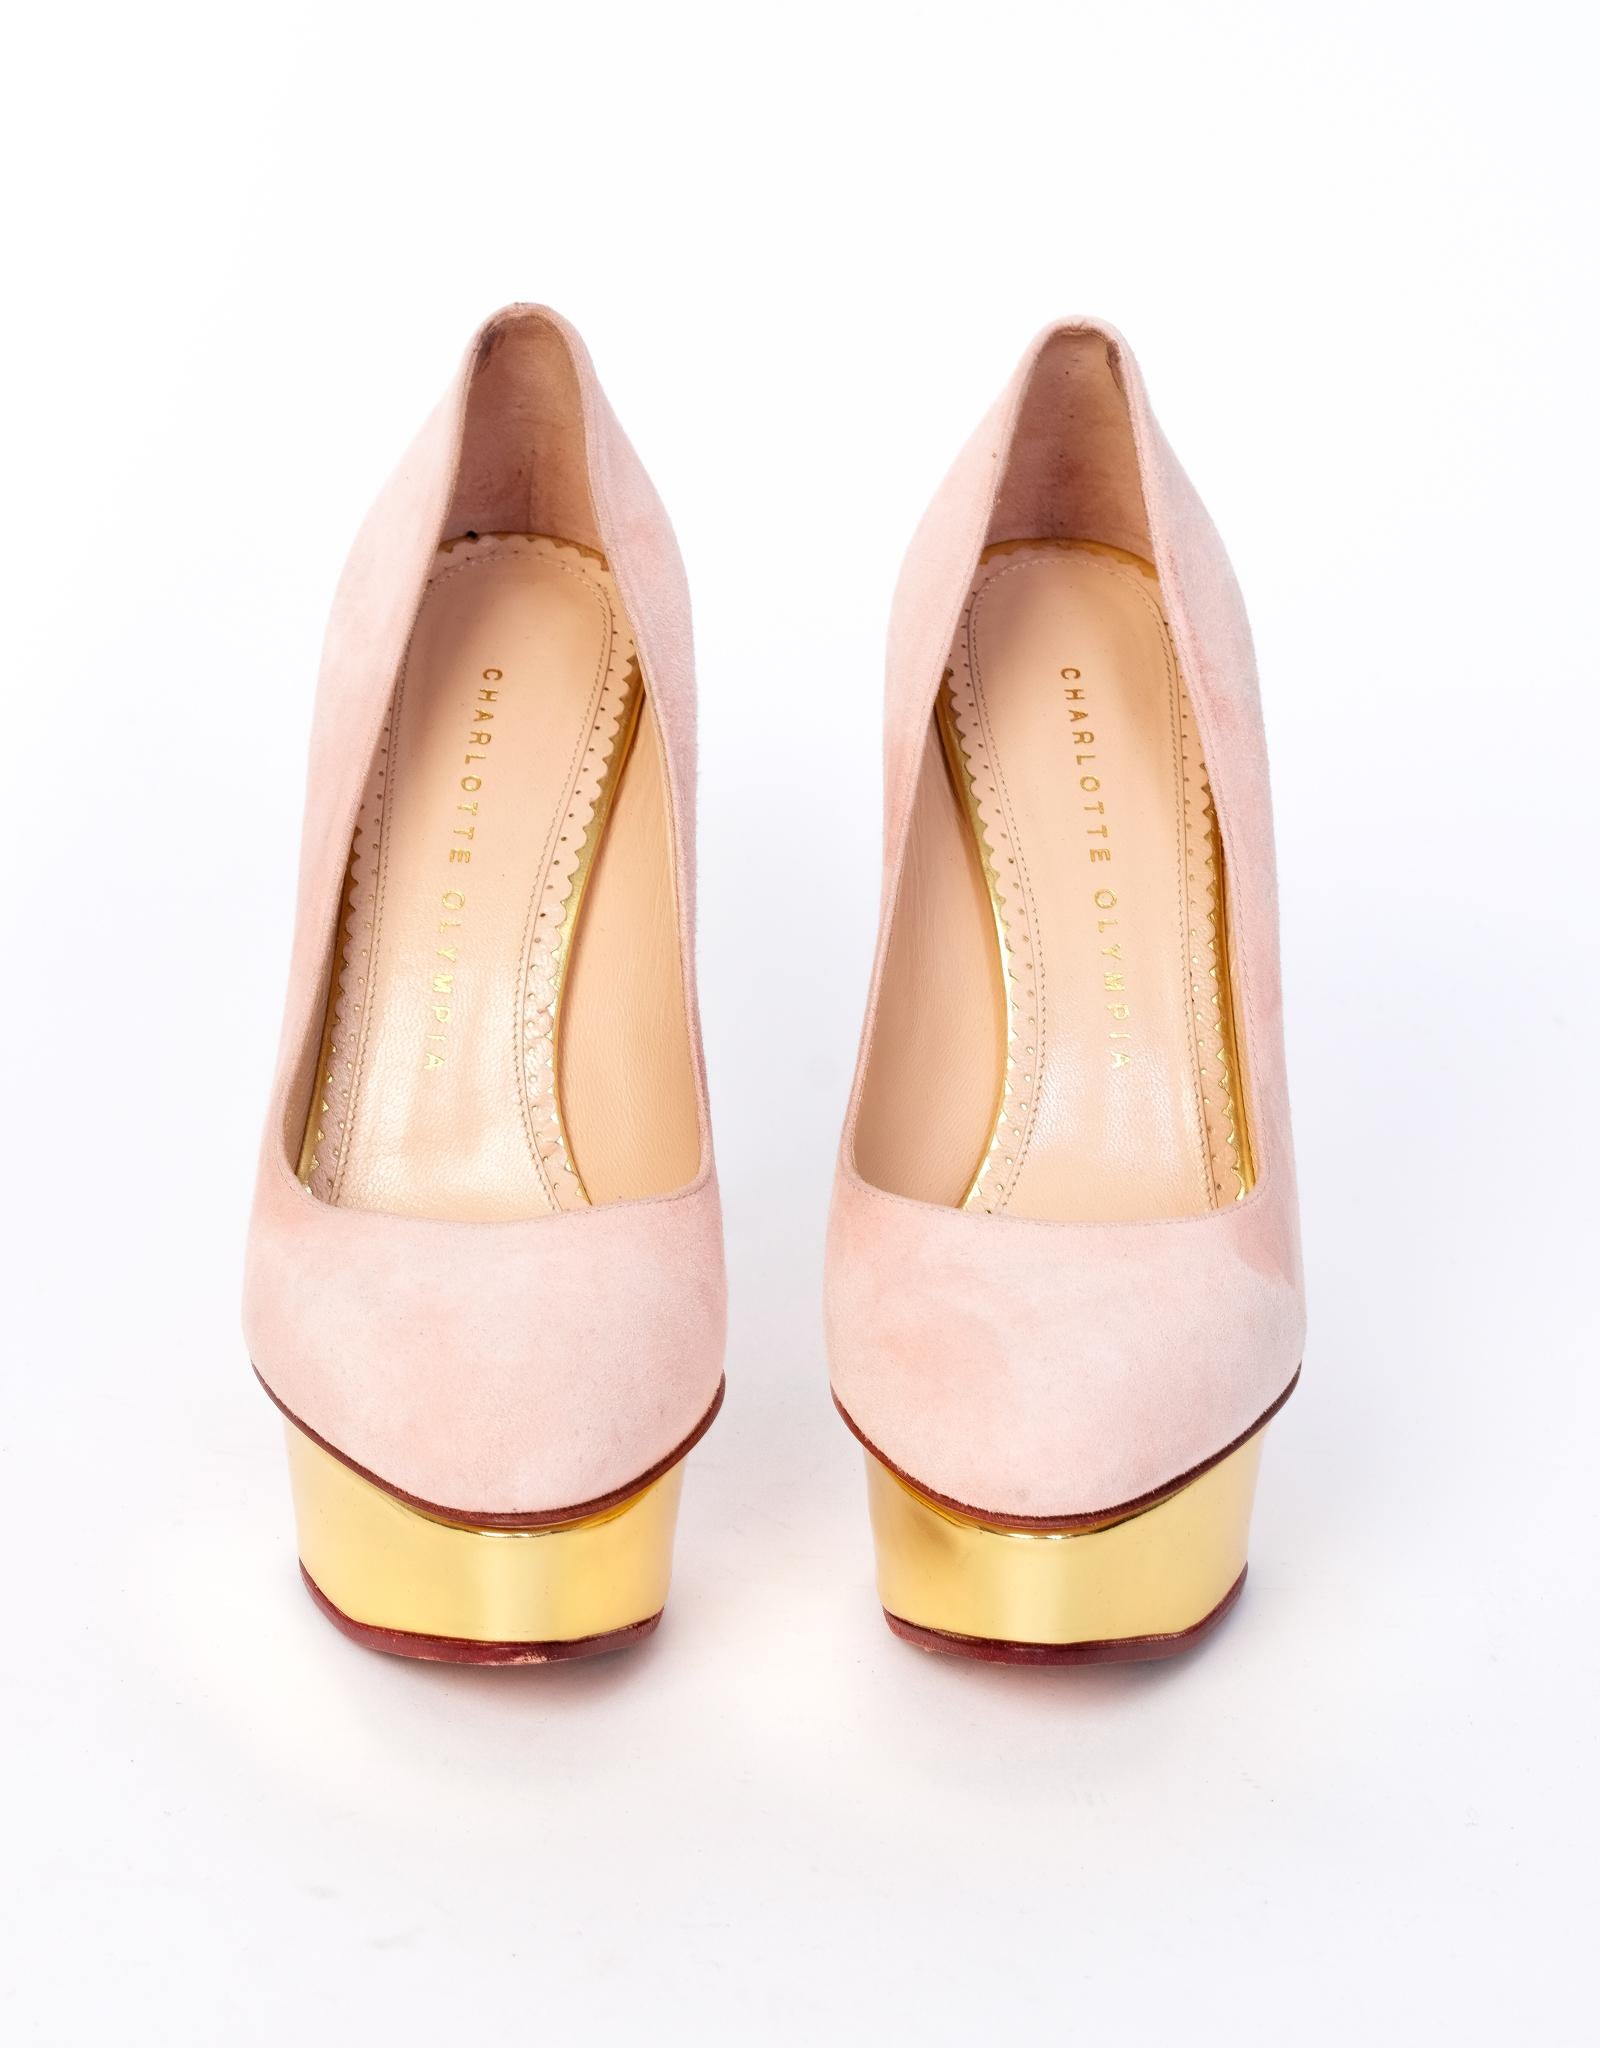 Charlotte Olympia Dolly nude suede heels with metallic platforms. Featuring a nude pink suede exterior and heels with a height of 140 mm, a beige leather interior and bottom, gold toned platforms with a height of 40 mm.

COLOR: Nude
MATERIAL: